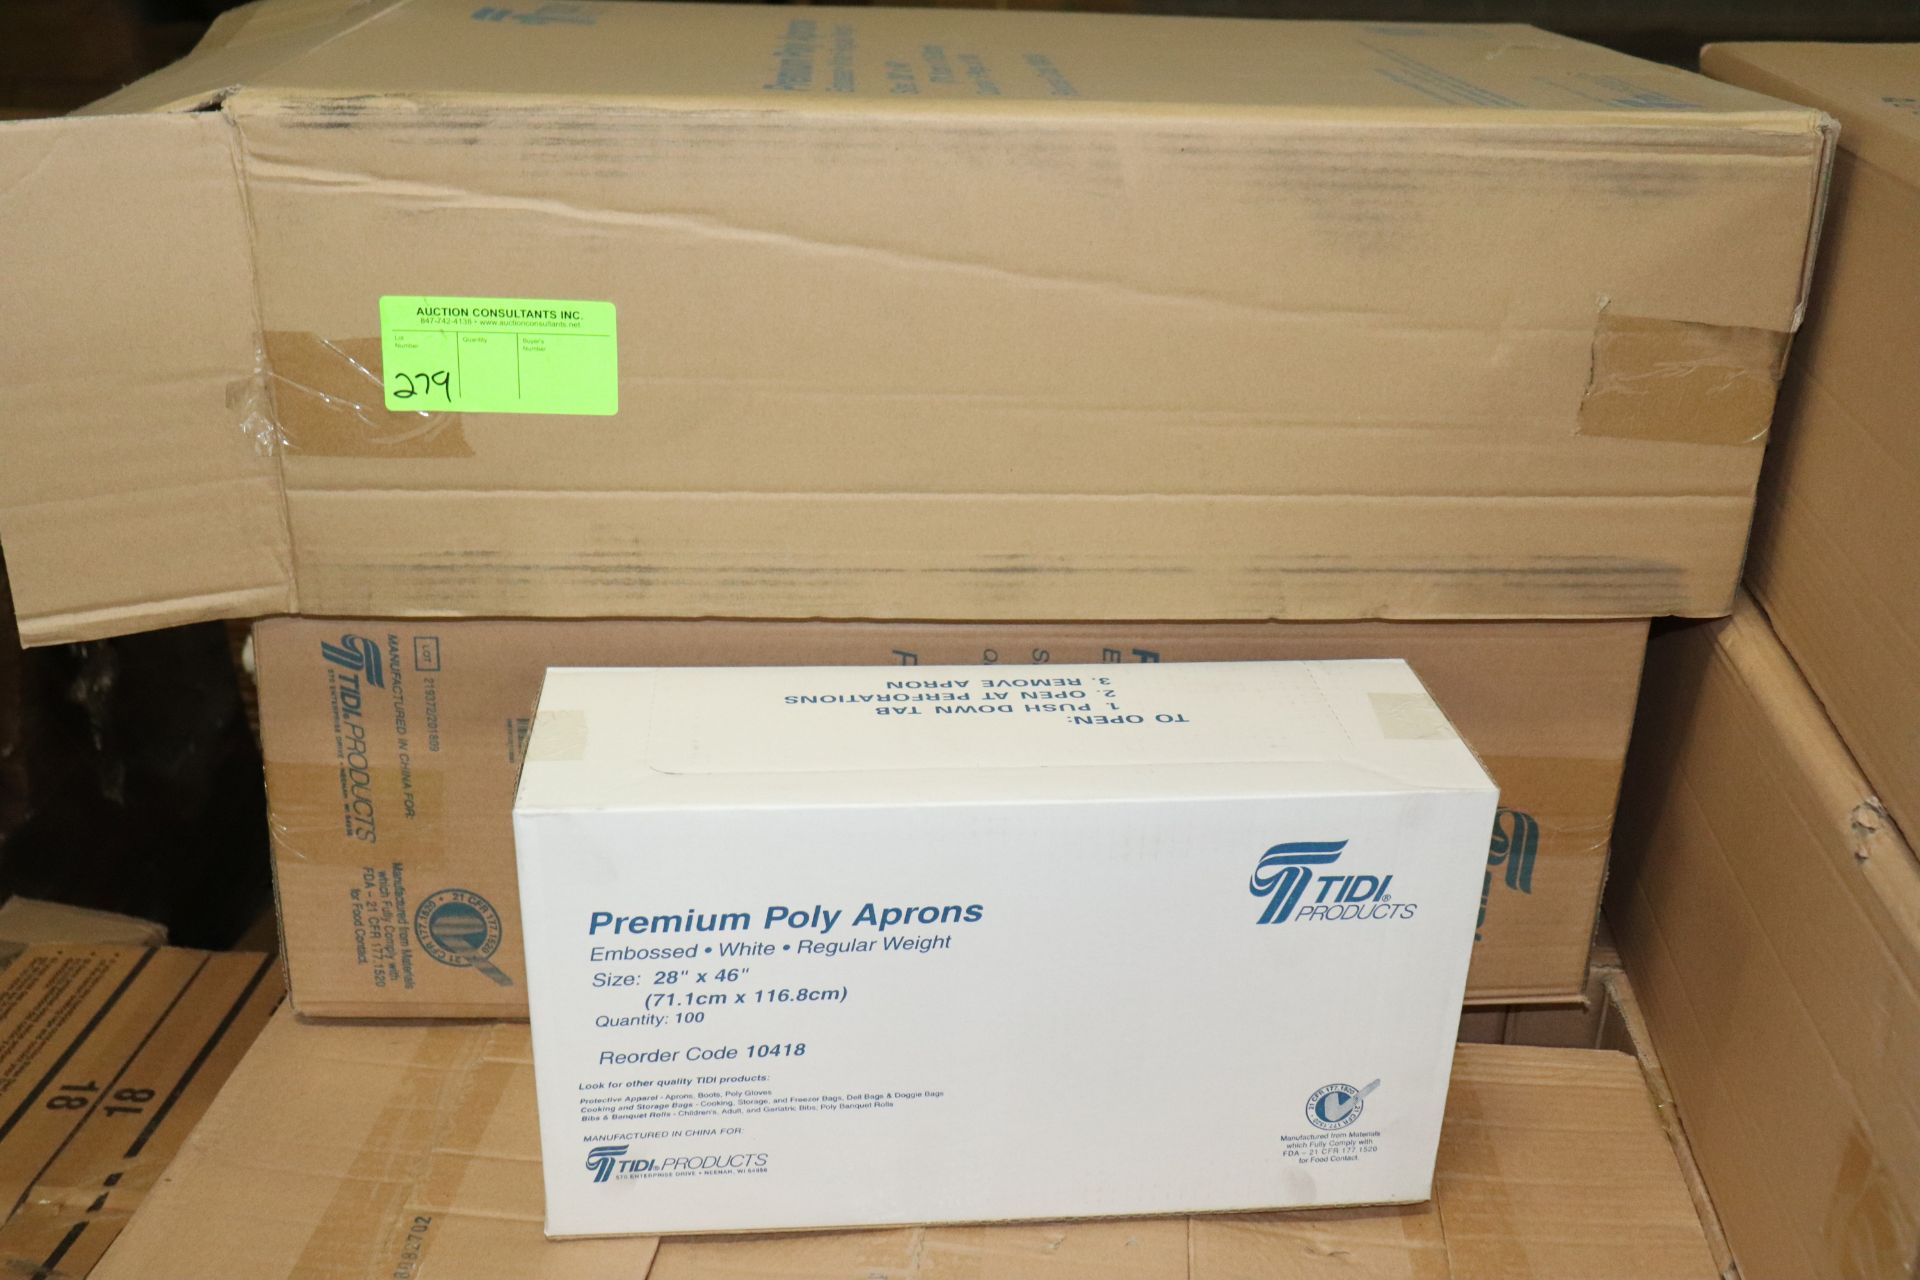 Partial box of Tidi Products premium poly aprons